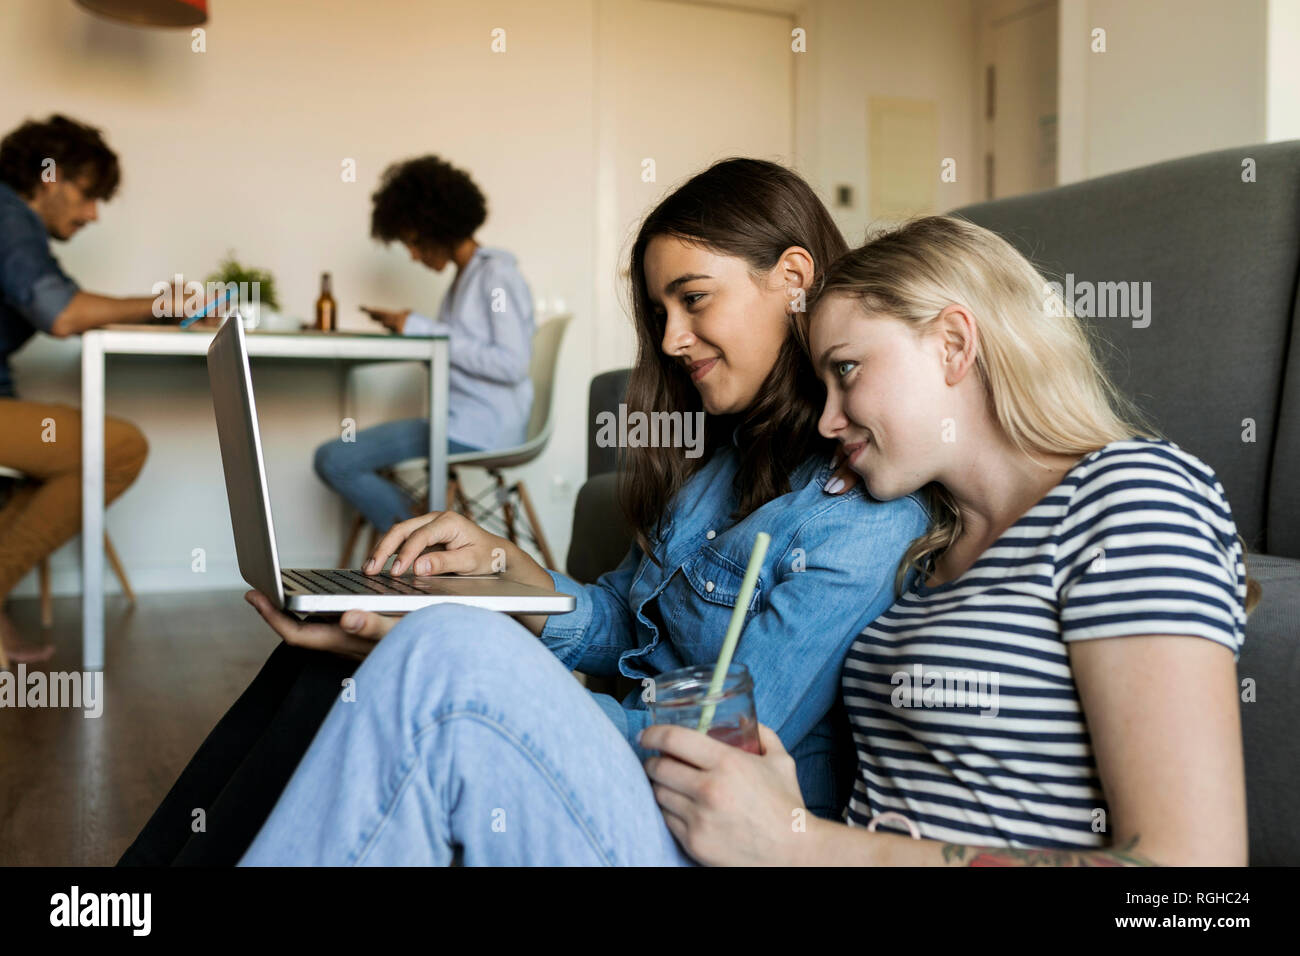 Two smiling young women sitting on floor sharing laptop with friends in background Stock Photo